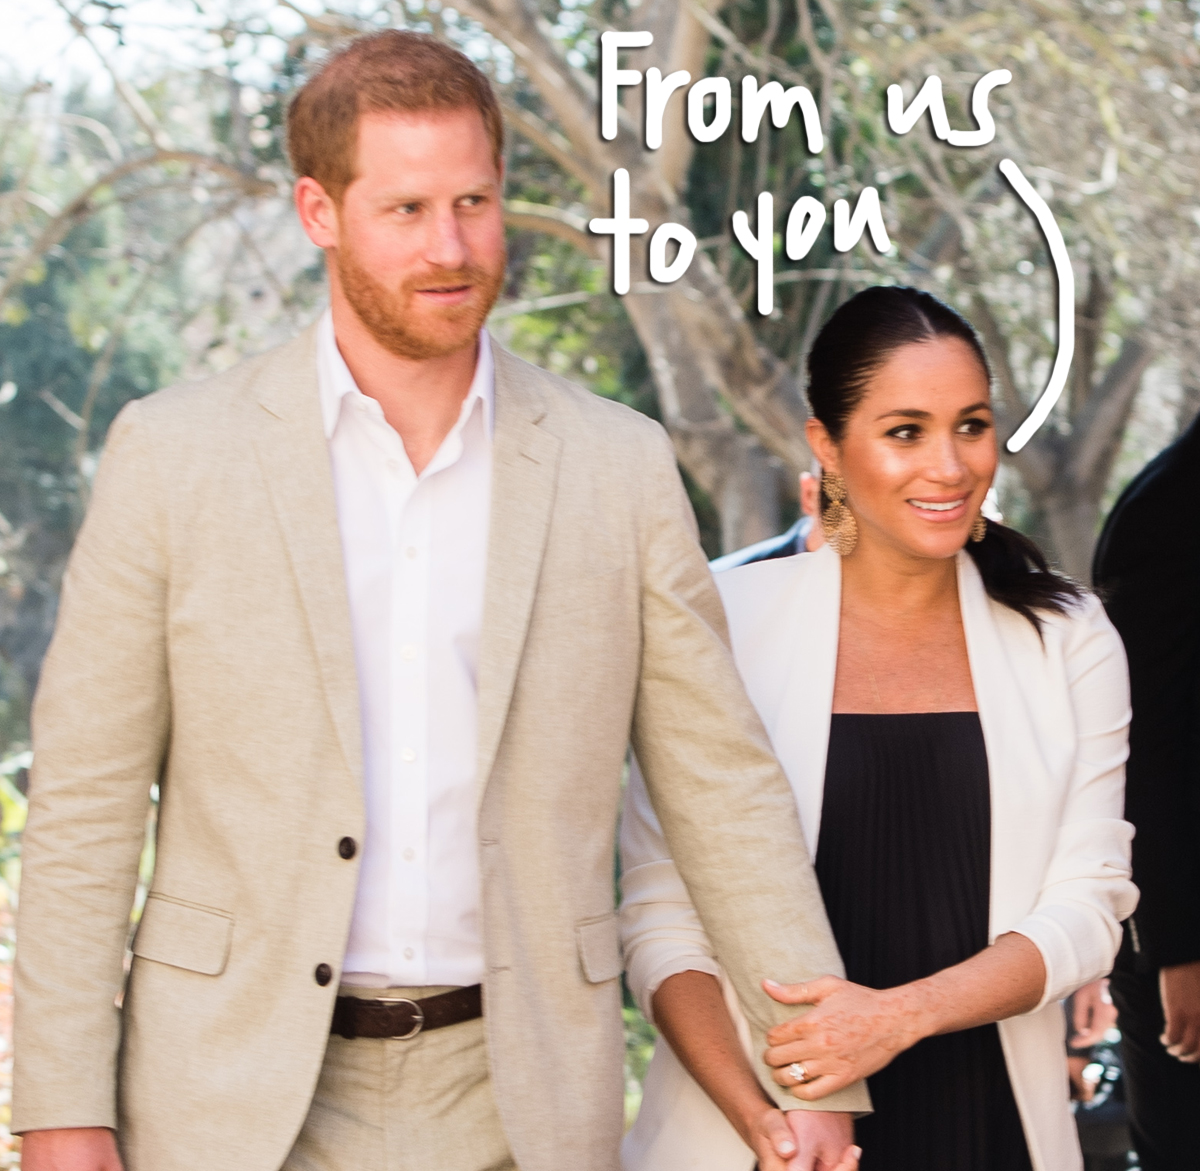 Baby Archie Is Front & Center In Prince Harry & Meghan Markle's